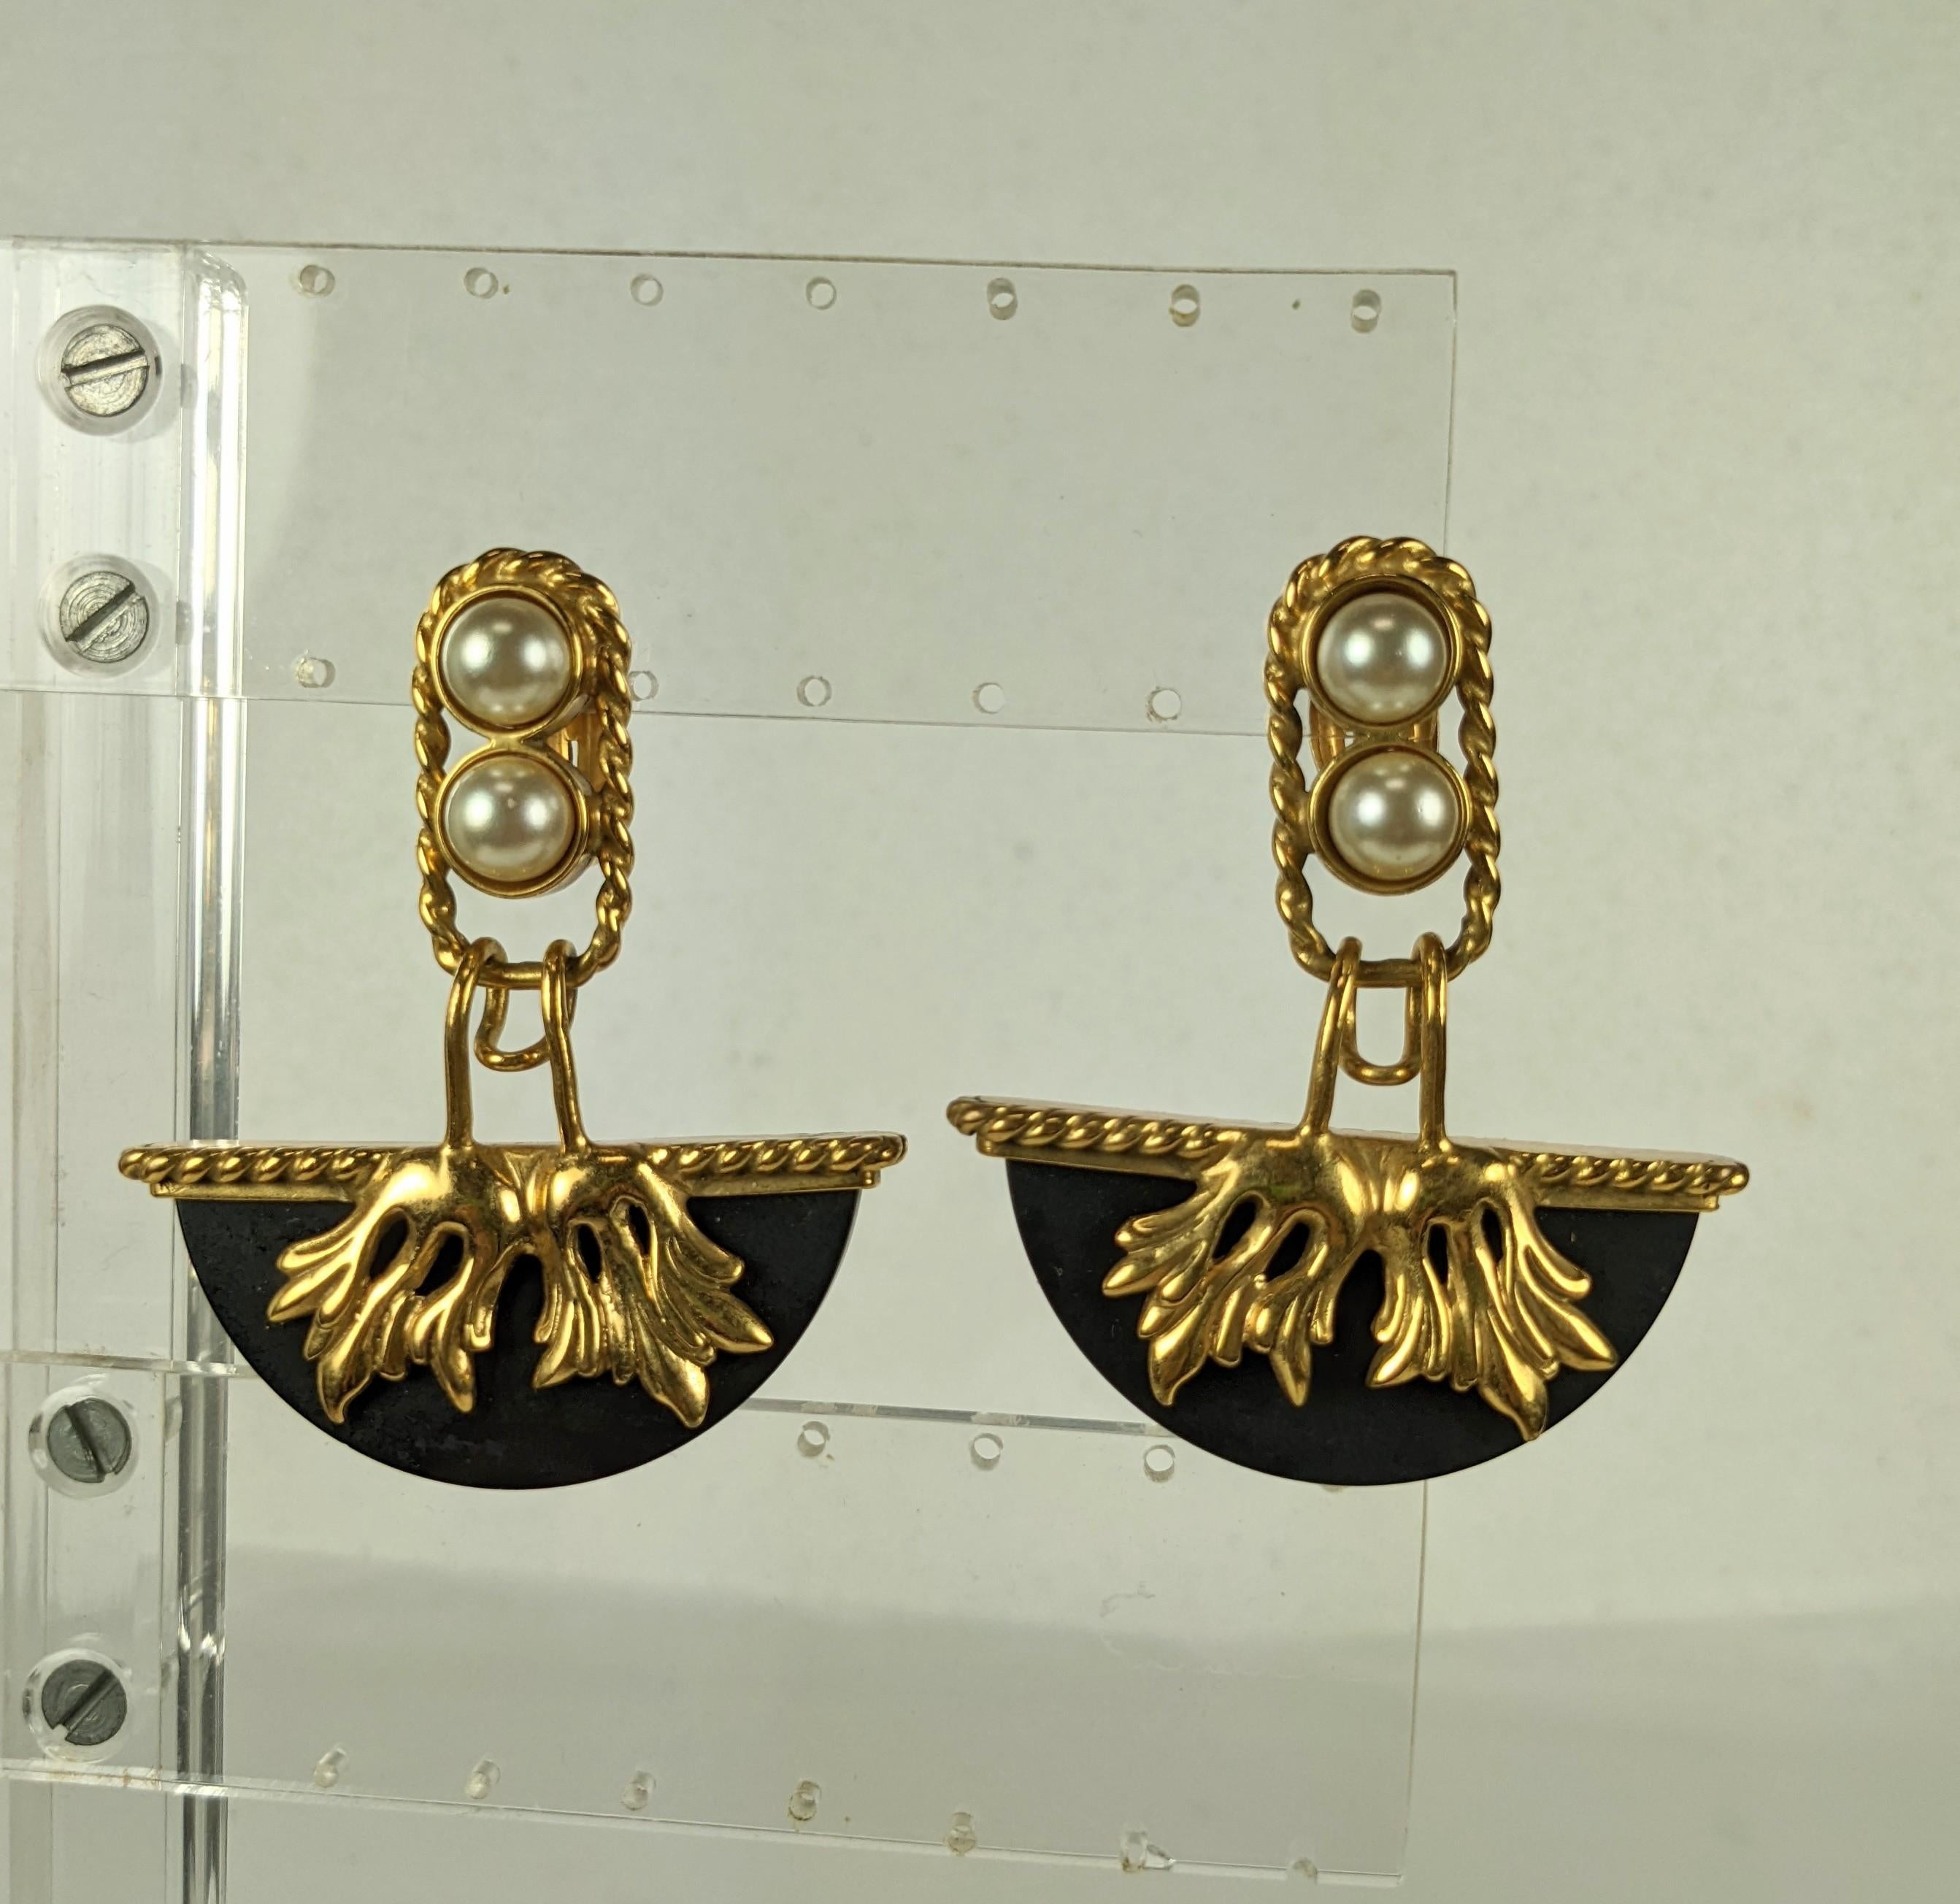 Dramatic French Gilt Metal and Bakelite Earrings in the style of Isabel Canovas or Dominique Aurientis from the 1980's. Large and impressive scale with faux pearls and baroque motifs. High quality of French manufacture in rich high carat gold